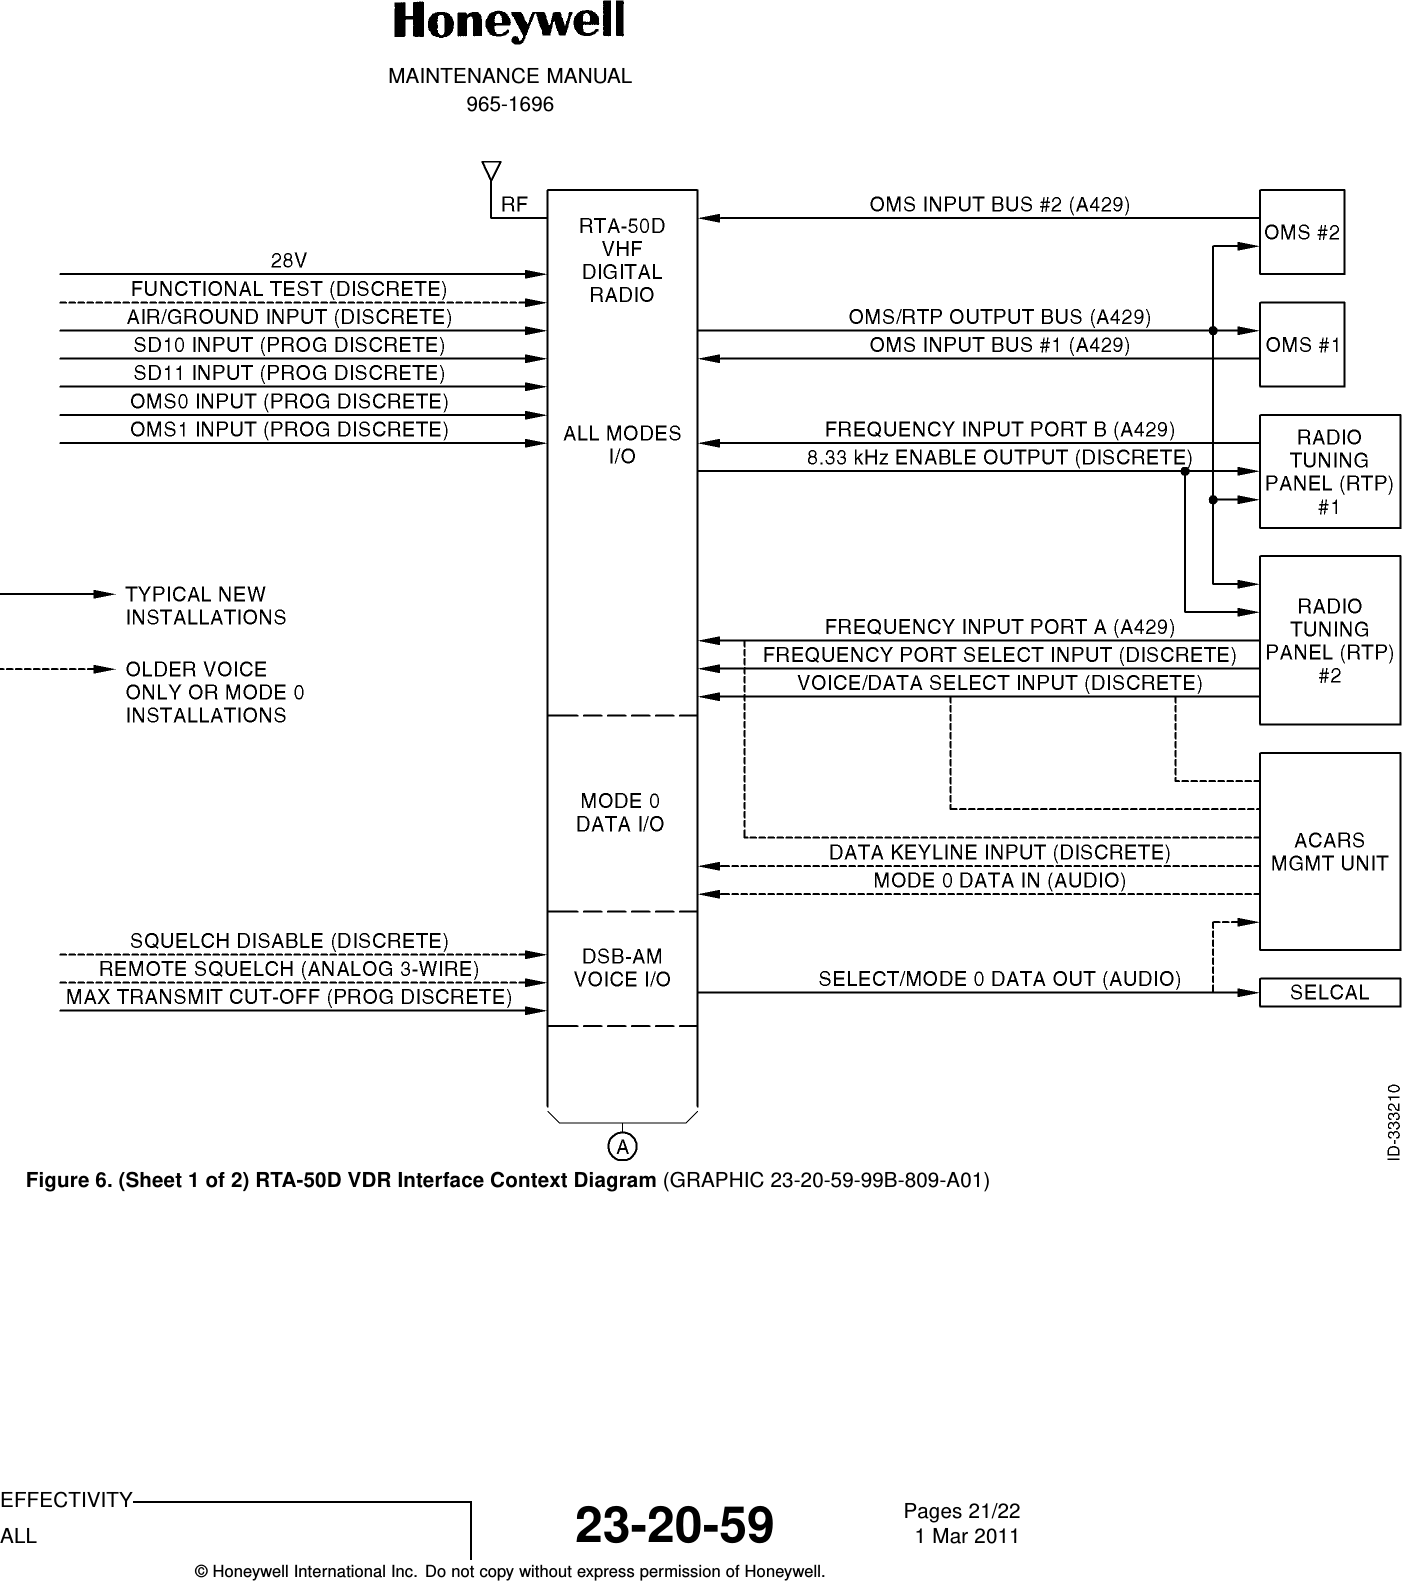 MAINTENANCE MANUAL965-1696Figure 6. (Sheet 1 of 2) RTA-50D VDR Interface Context Diagram (GRAPHIC 23-20-59-99B-809-A01)EFFECTIVITYALL 23-20-59 Pages 21/221 Mar 2011© Honeywell International Inc. Do not copy without express permission of Honeywell.